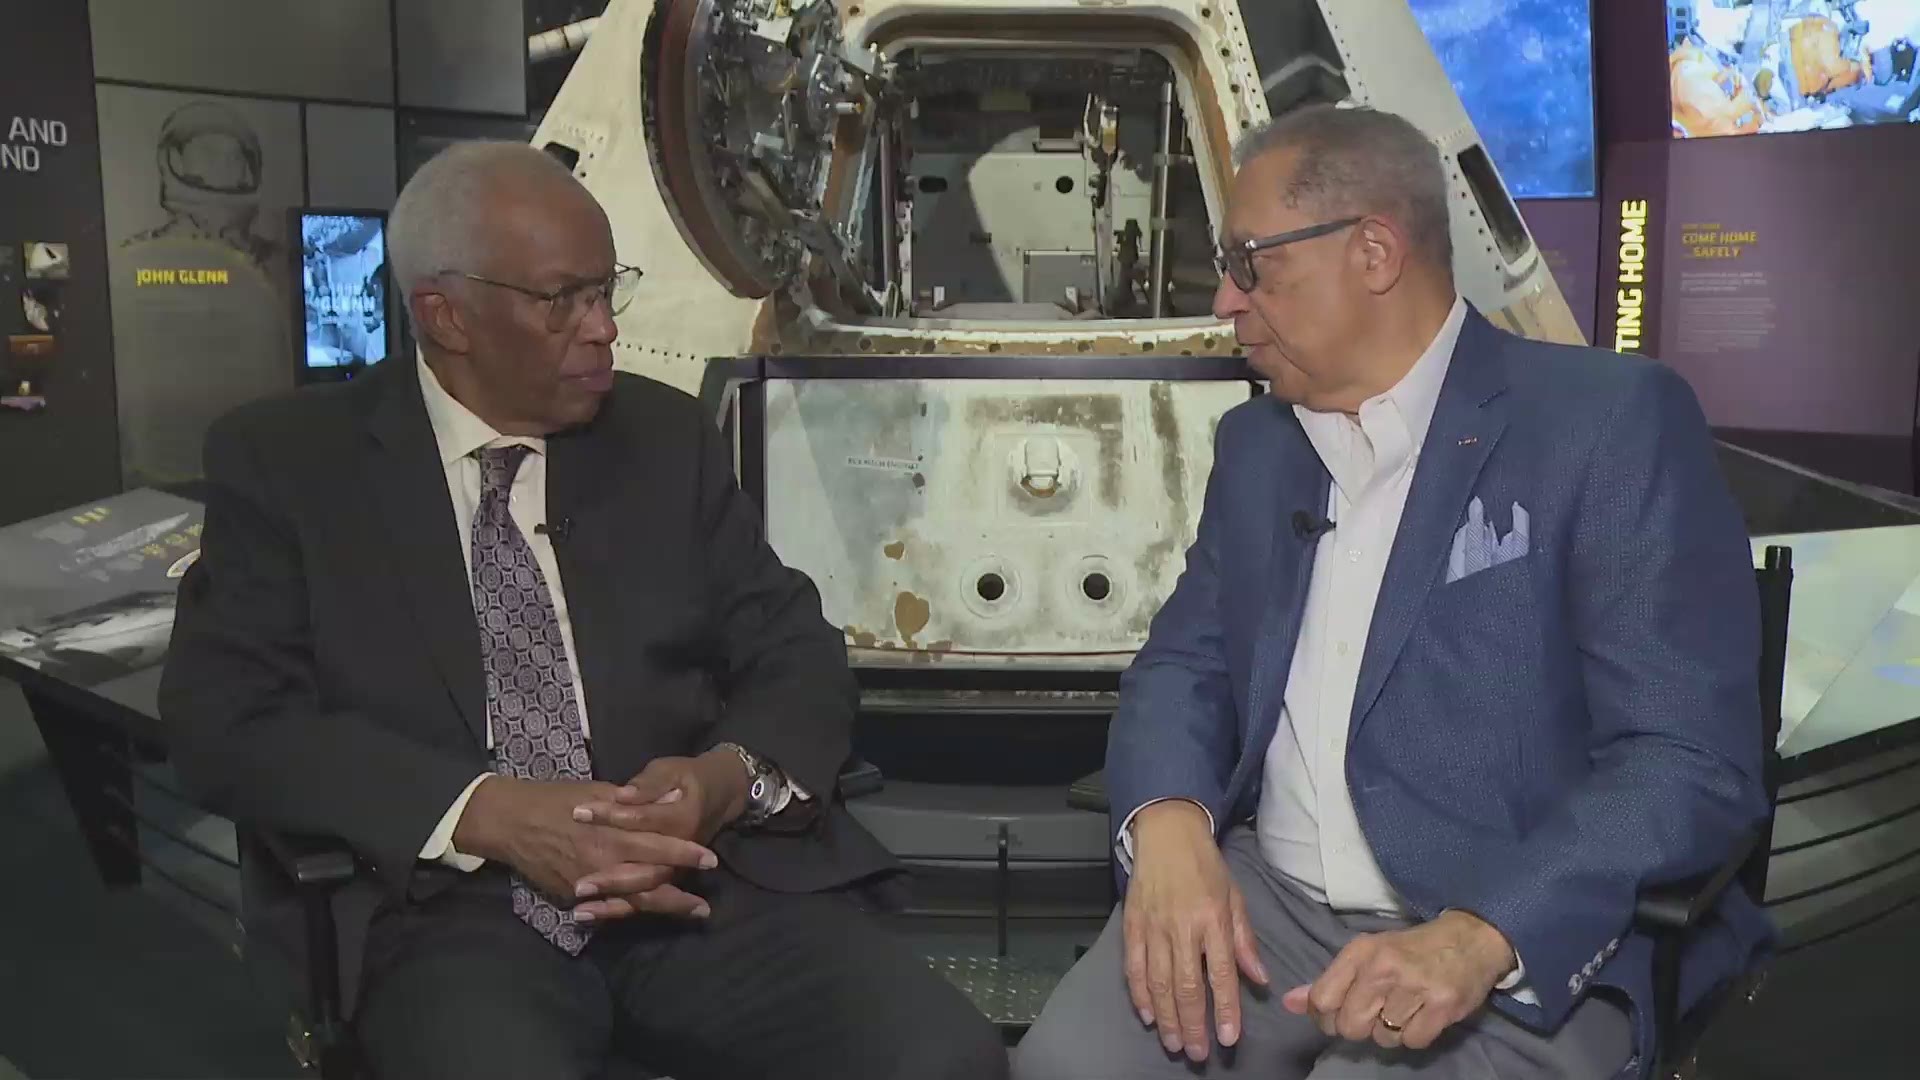 Guian Bluford was the first African-American to venture into space. On the 50th anniversary of the successful Apollo 11 mission to put men on the surface of the moon and return them safely to Earth, Bluford was reflective on the spacemen who went before him.